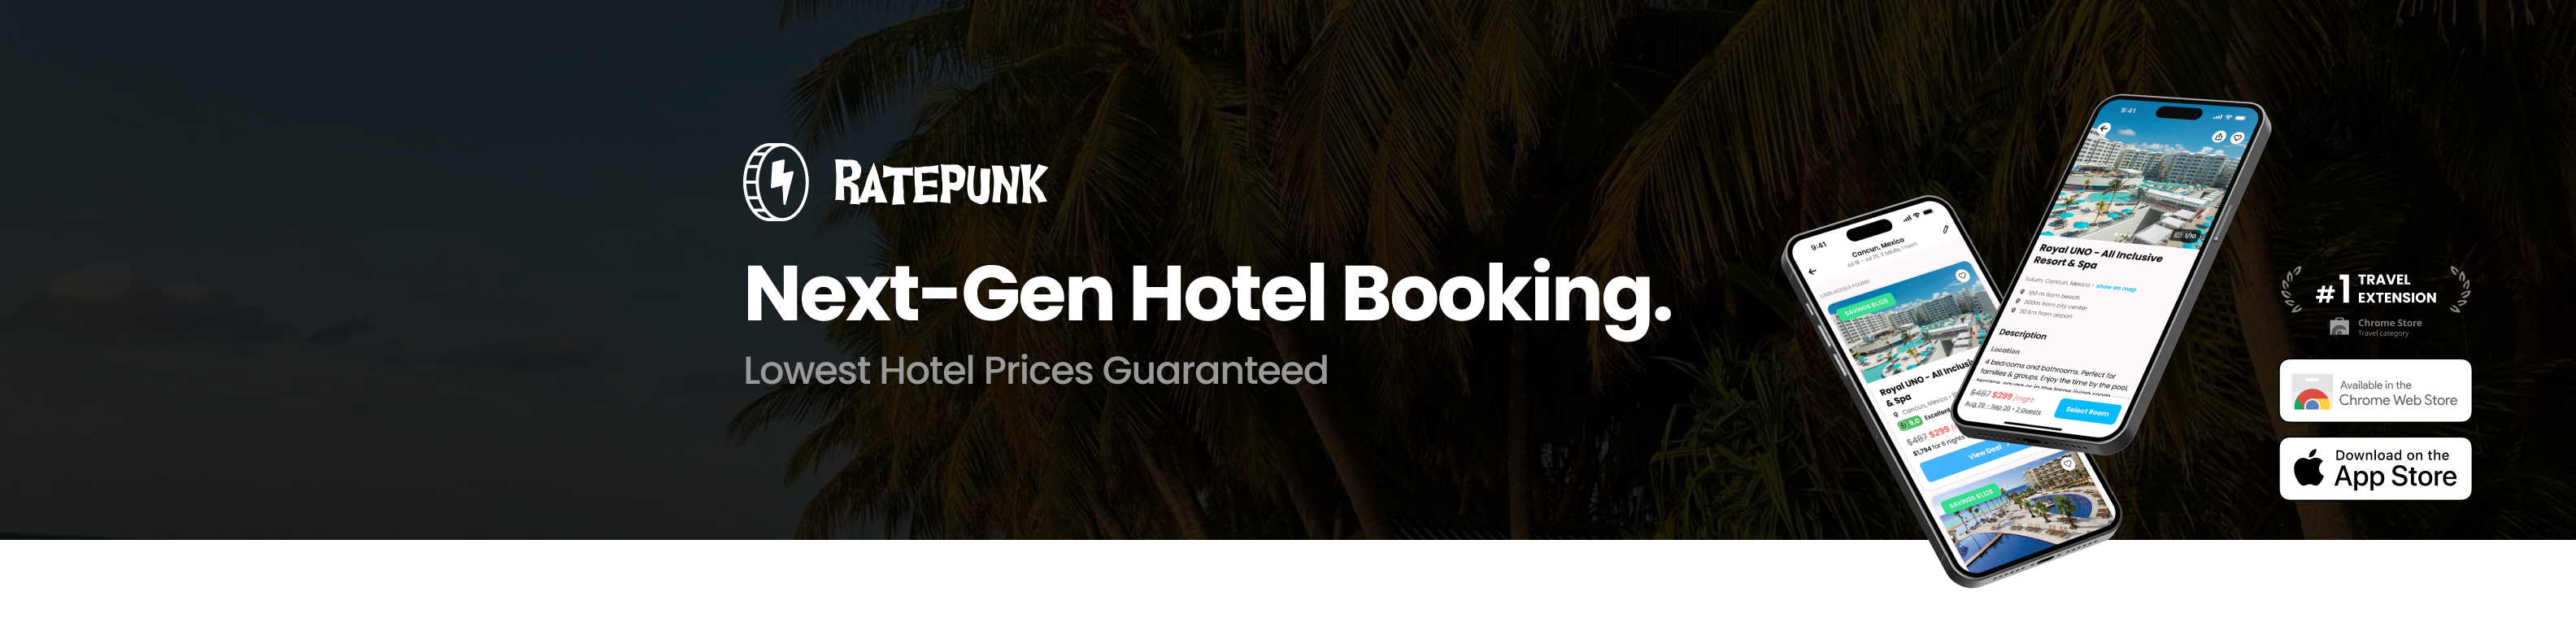 ratepunk - next gen otel booking - lowest hotel prices guaranteed 